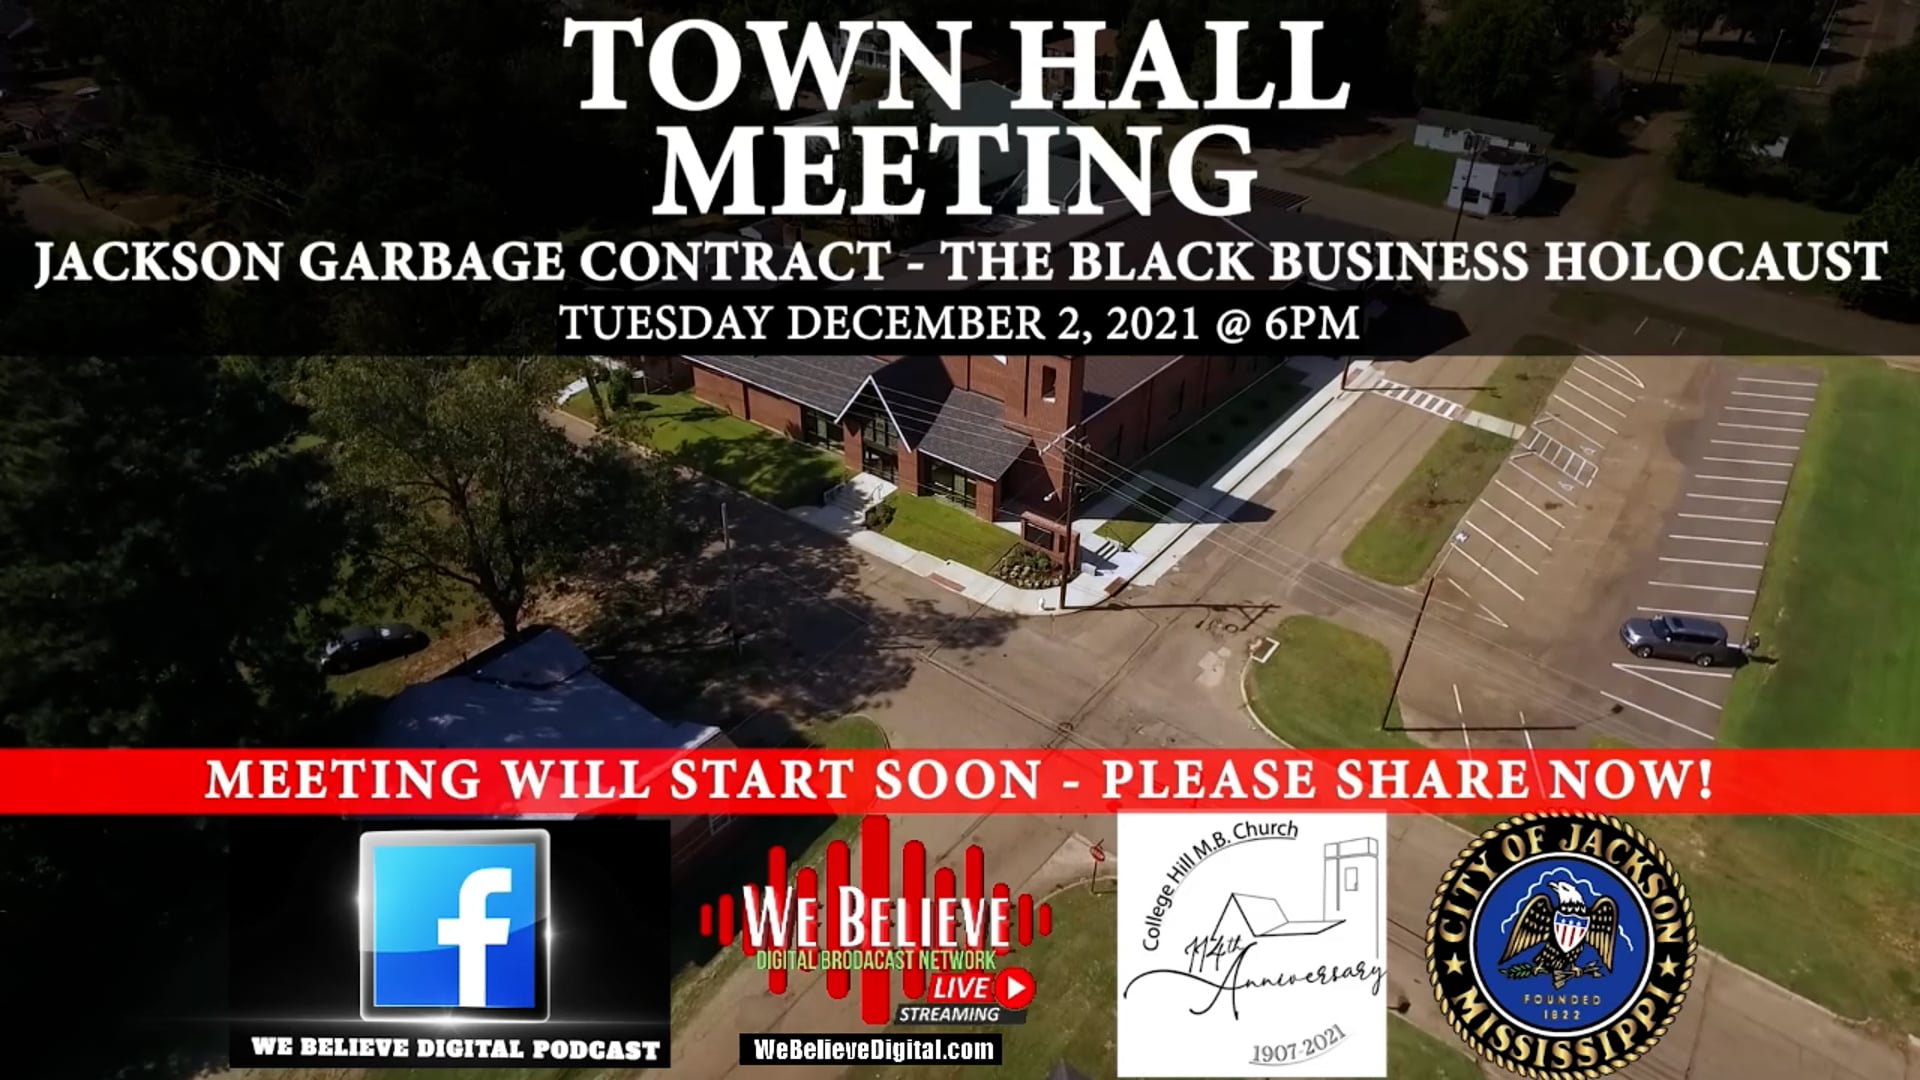 GARBAGE CONTRACT TOWNHALL HOSTED BY MAYOR CHOKWE ANTAR LUMUMBA, JACKSON @ COLLGE HILL M.B. CHURCH - 12.2.21